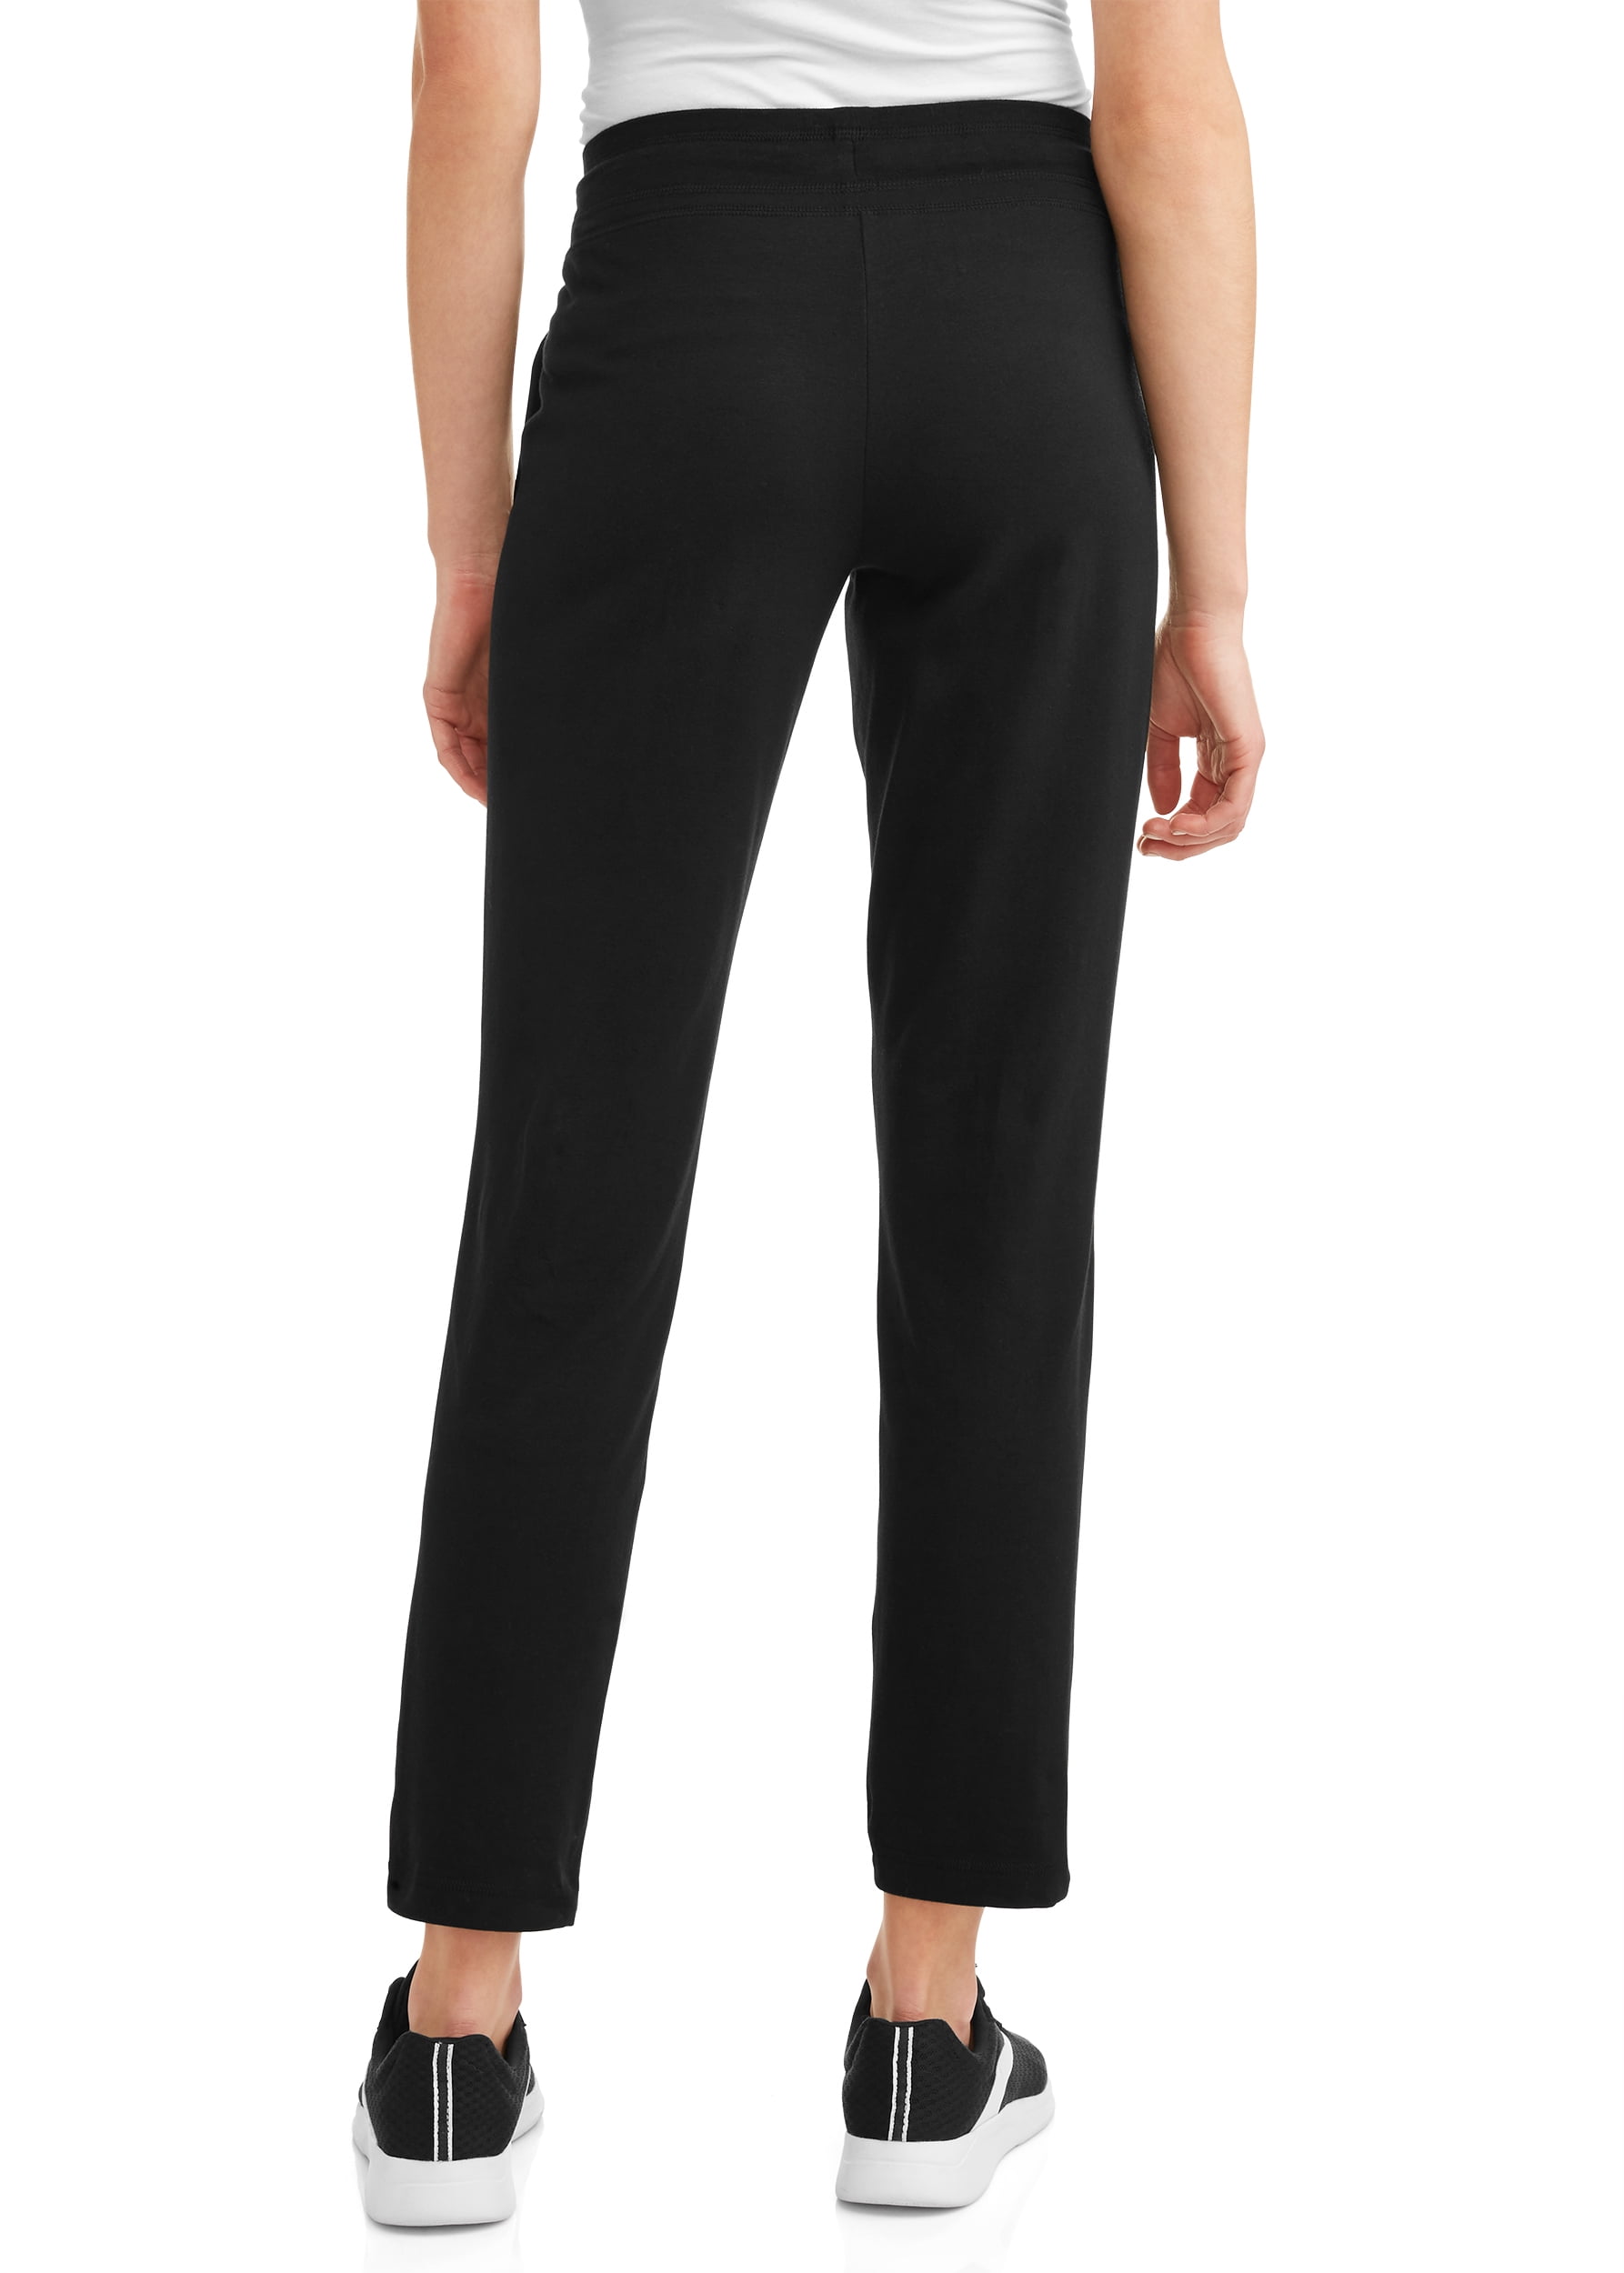  Athletic Works Women's Active Core Knit Pant (Black Soot,  X-Small 0/2) : Clothing, Shoes & Jewelry